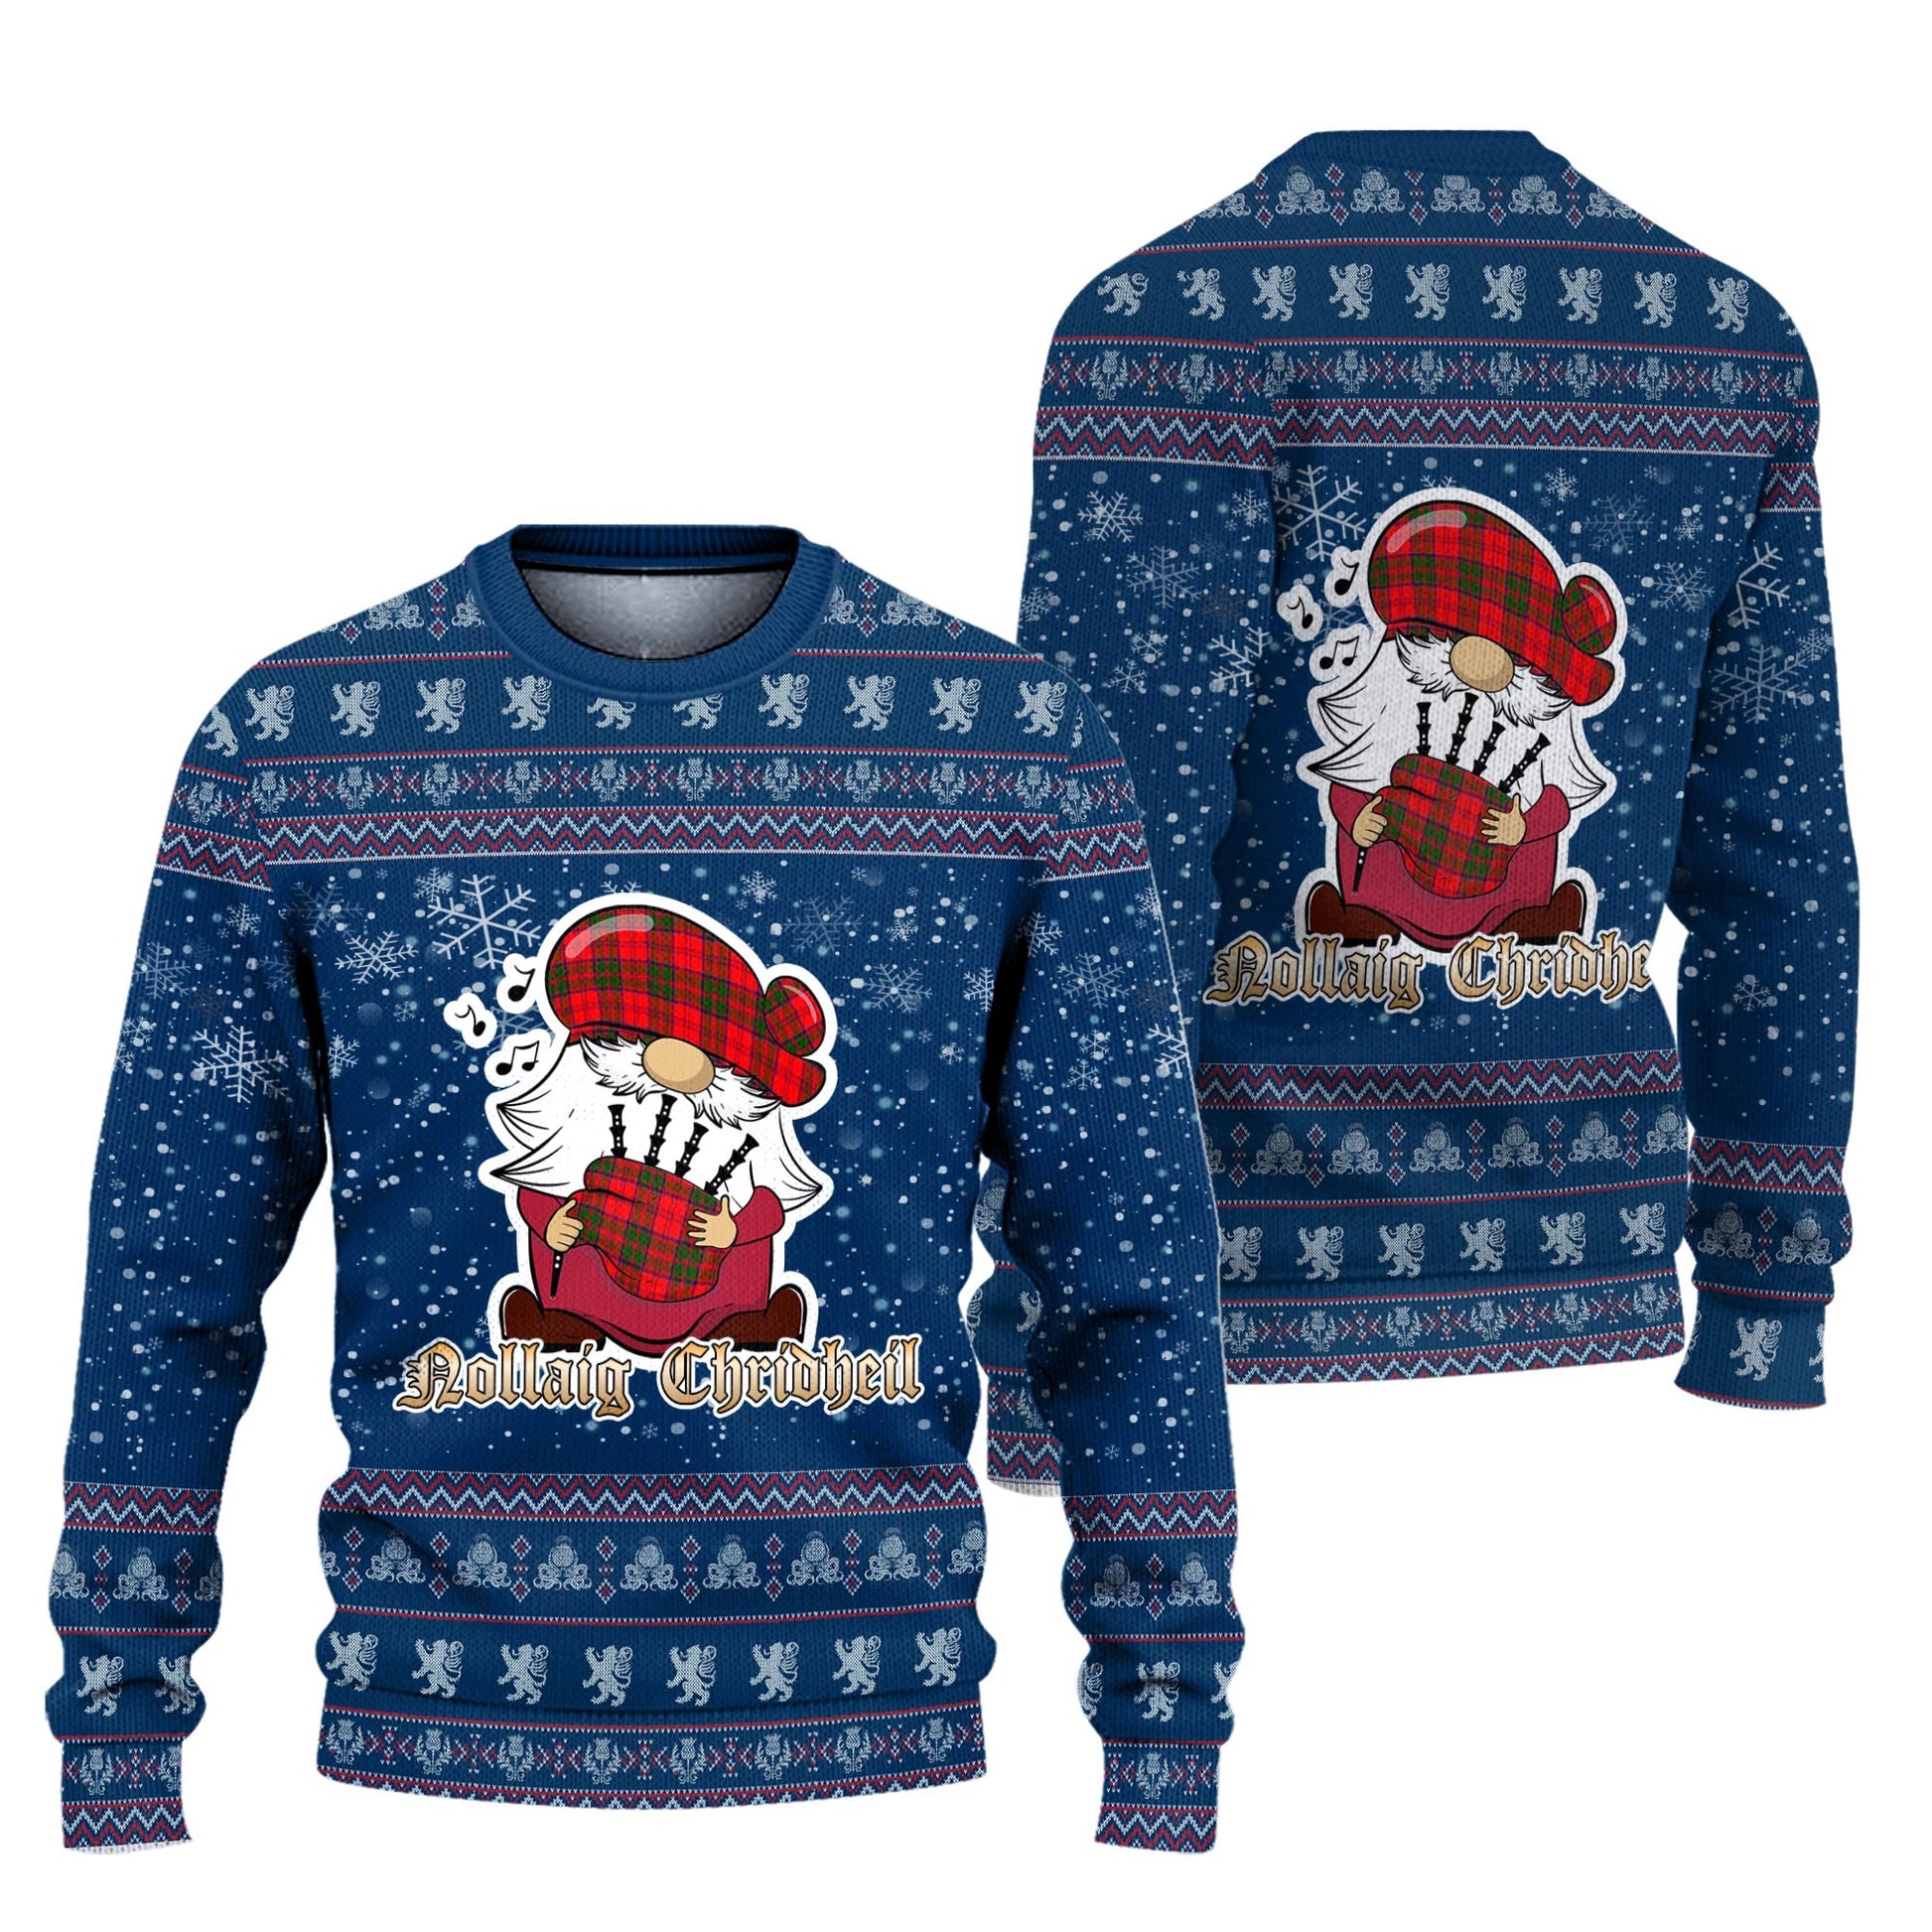 Heron Clan Christmas Family Knitted Sweater with Funny Gnome Playing Bagpipes Unisex Blue - Tartanvibesclothing